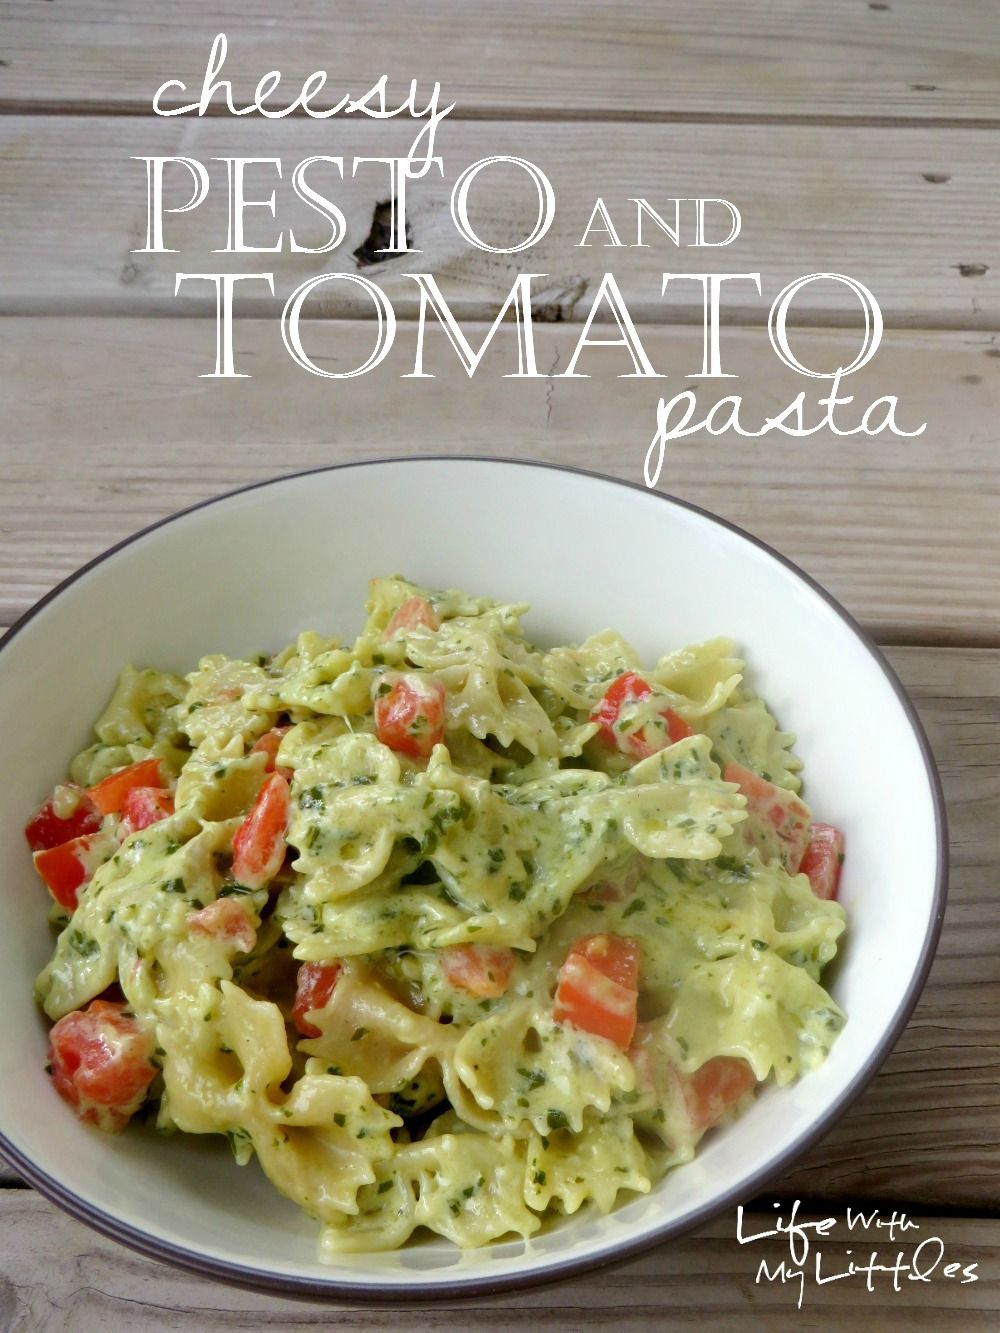 Cheesy Pesto and Tomato Pasta: A creamy, cheesy pasta made with homemade basil pesto and tossed with garden-fresh tomatoes!